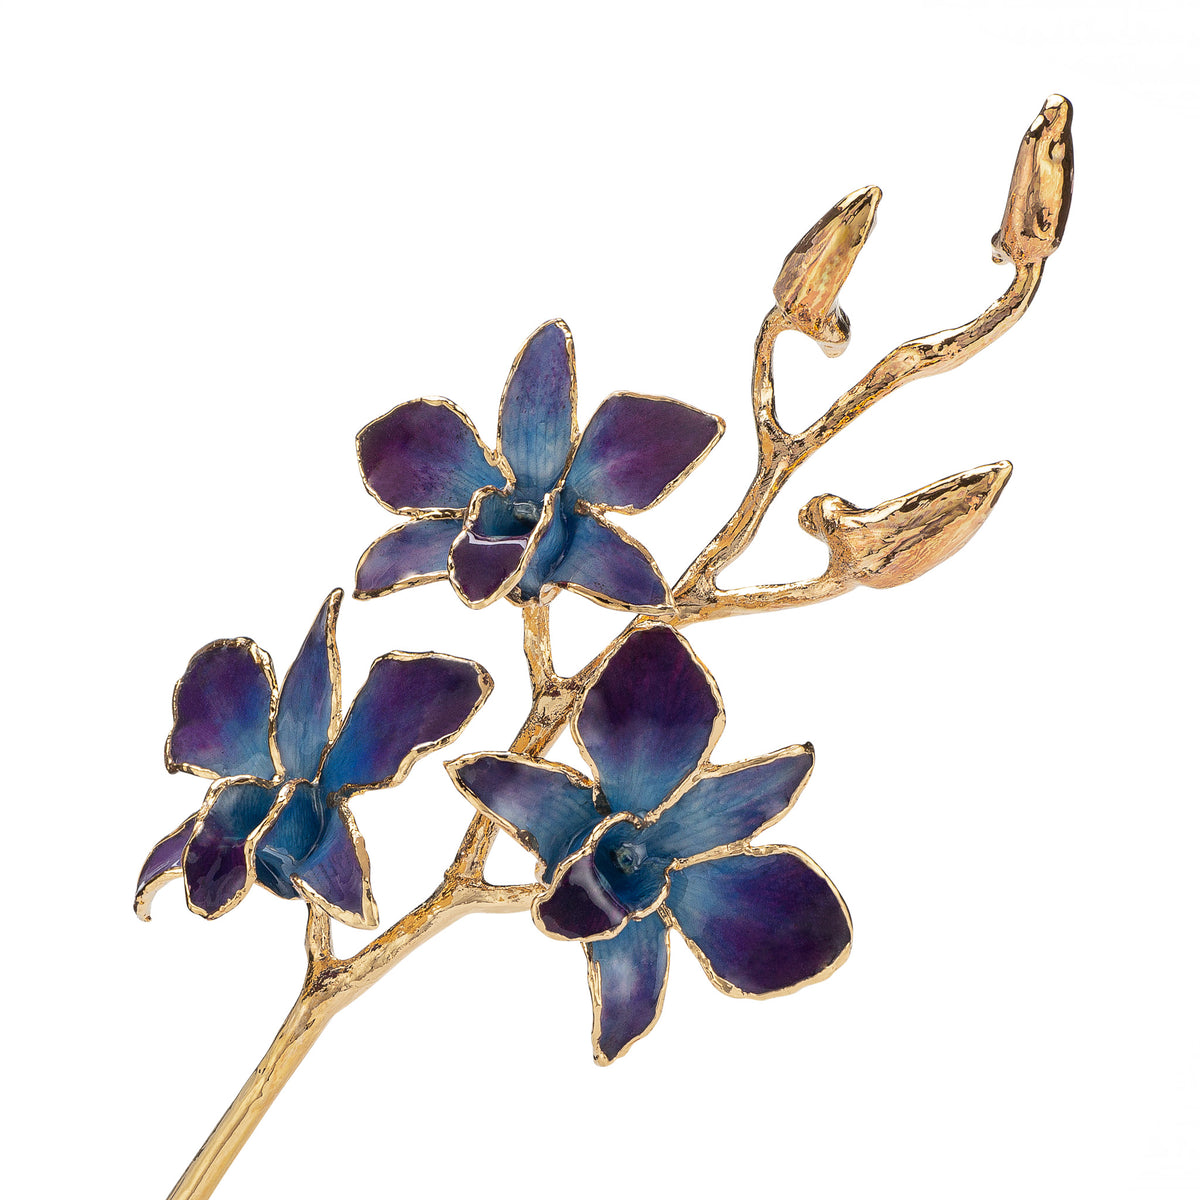 24K Gold Dipped Orchid in Lilac Blue view of gold stem and flowers